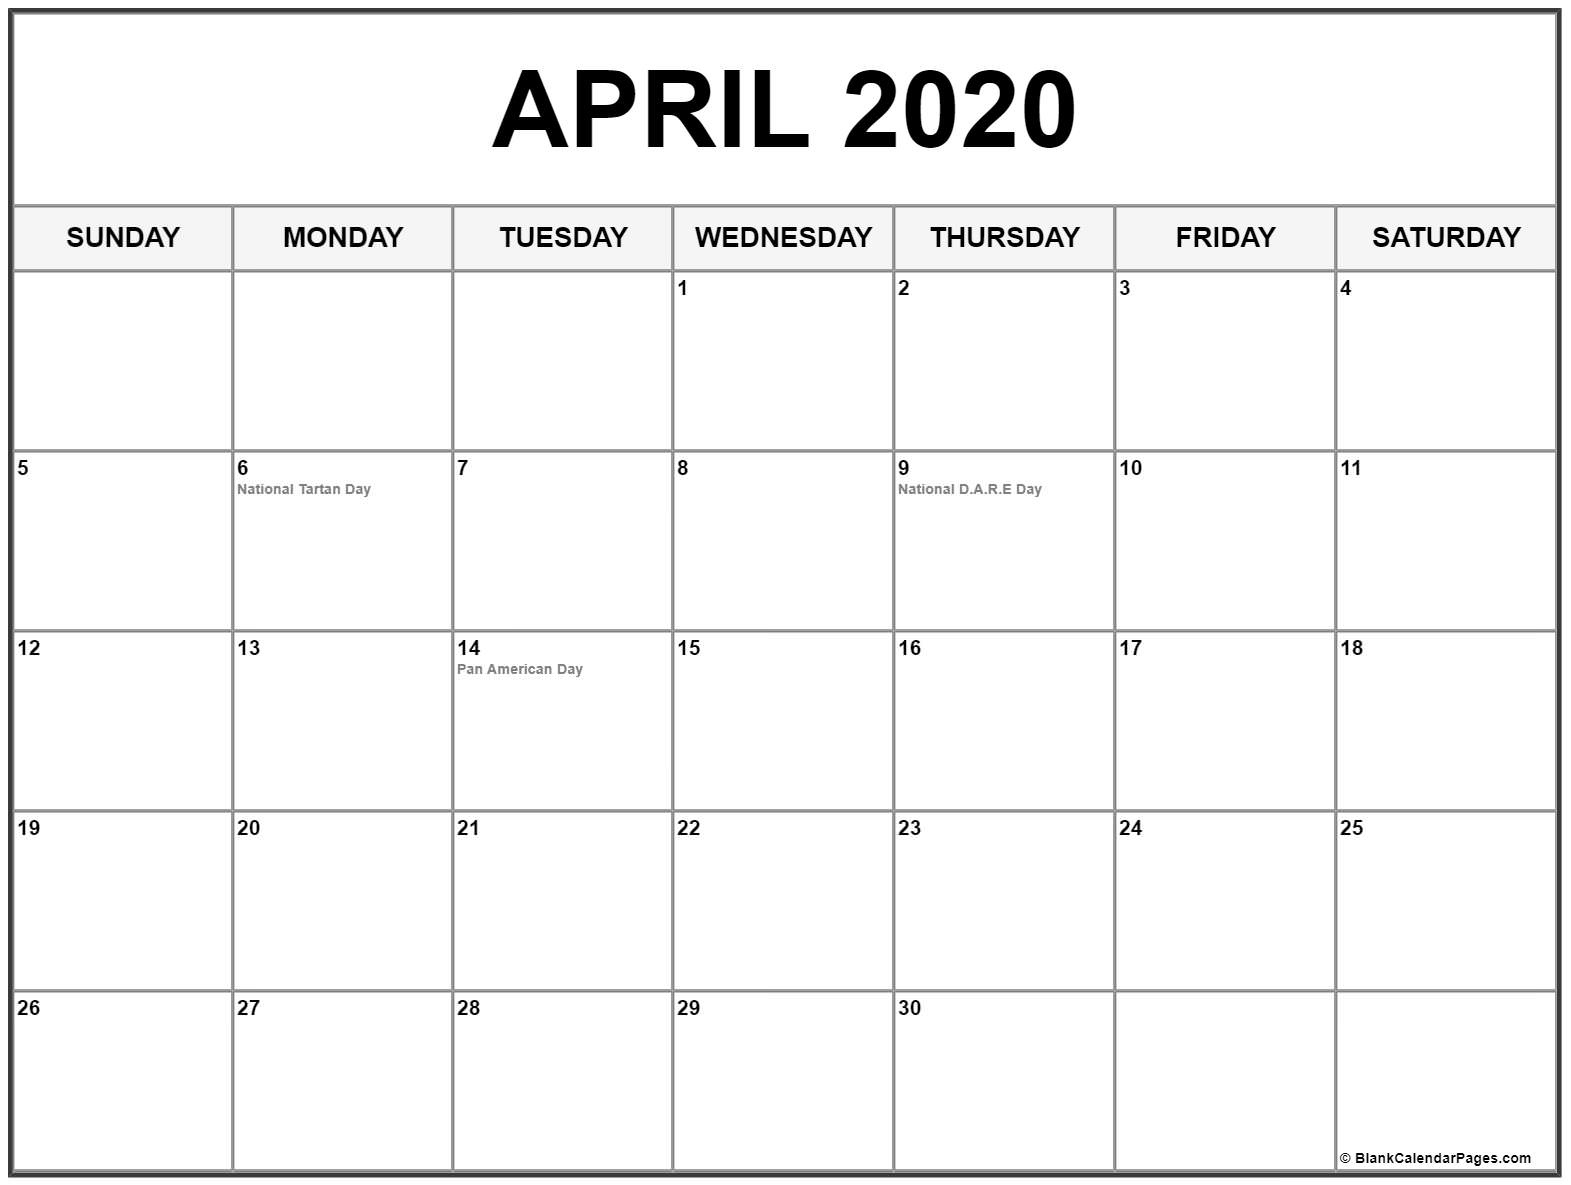 Collection Of April 2020 Calendars With Holidays-Printable Printable 2020 Calendar Showing Federal Holidays